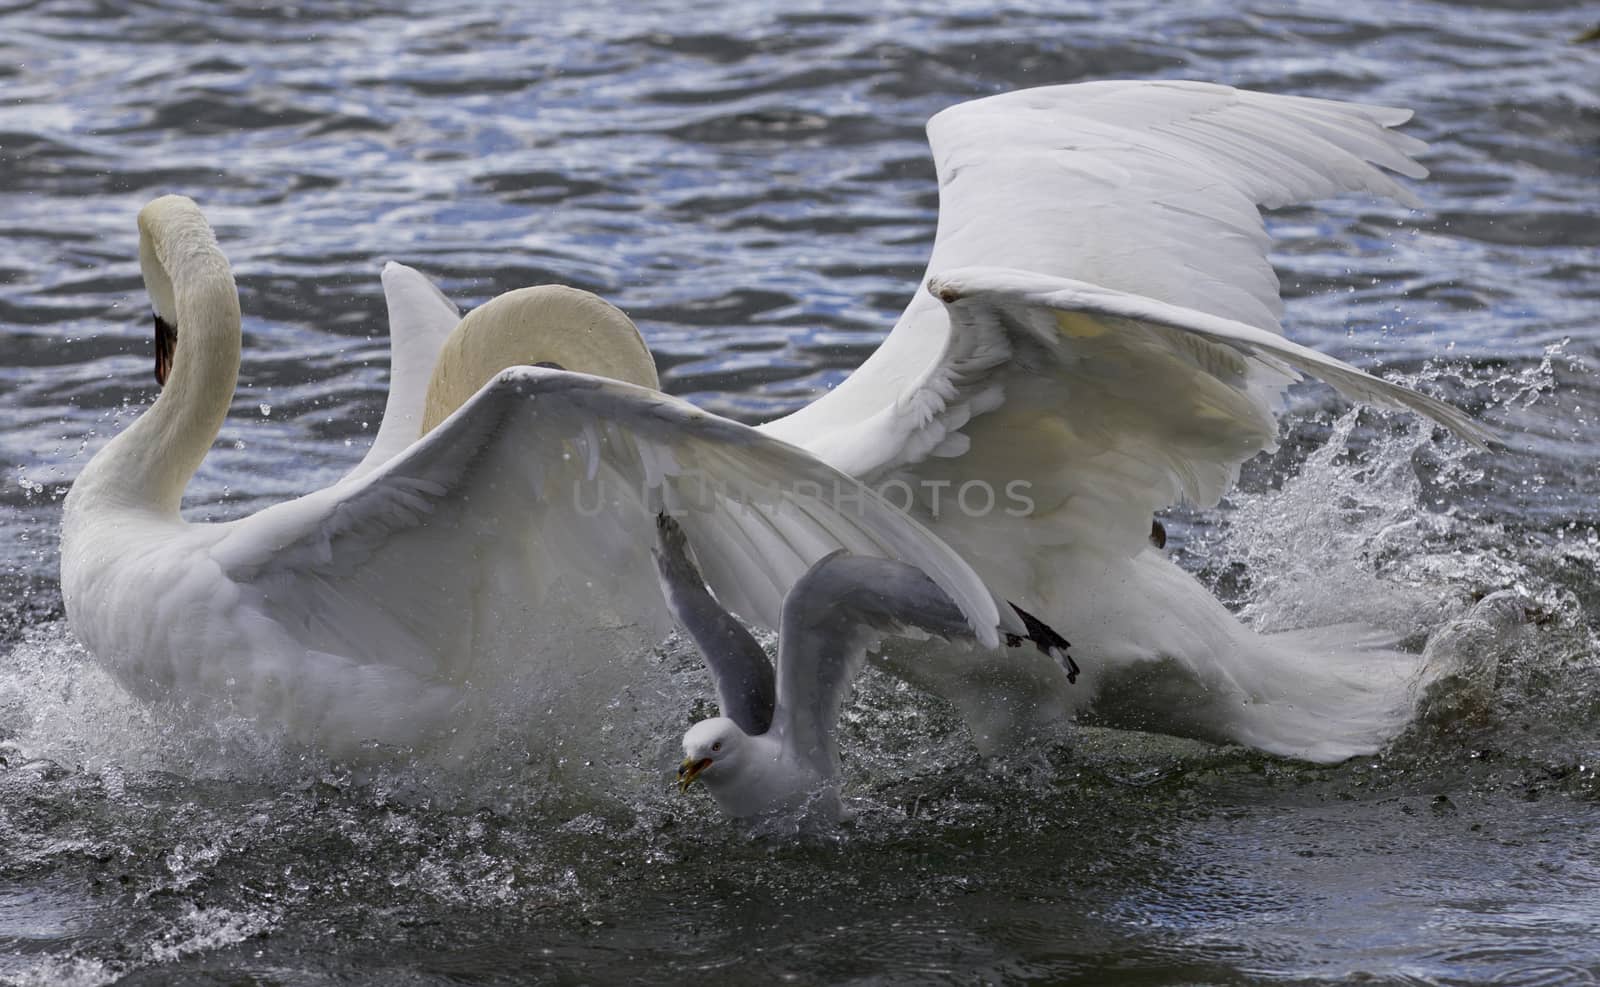 Amazing expressive image with the fighting swans by teo